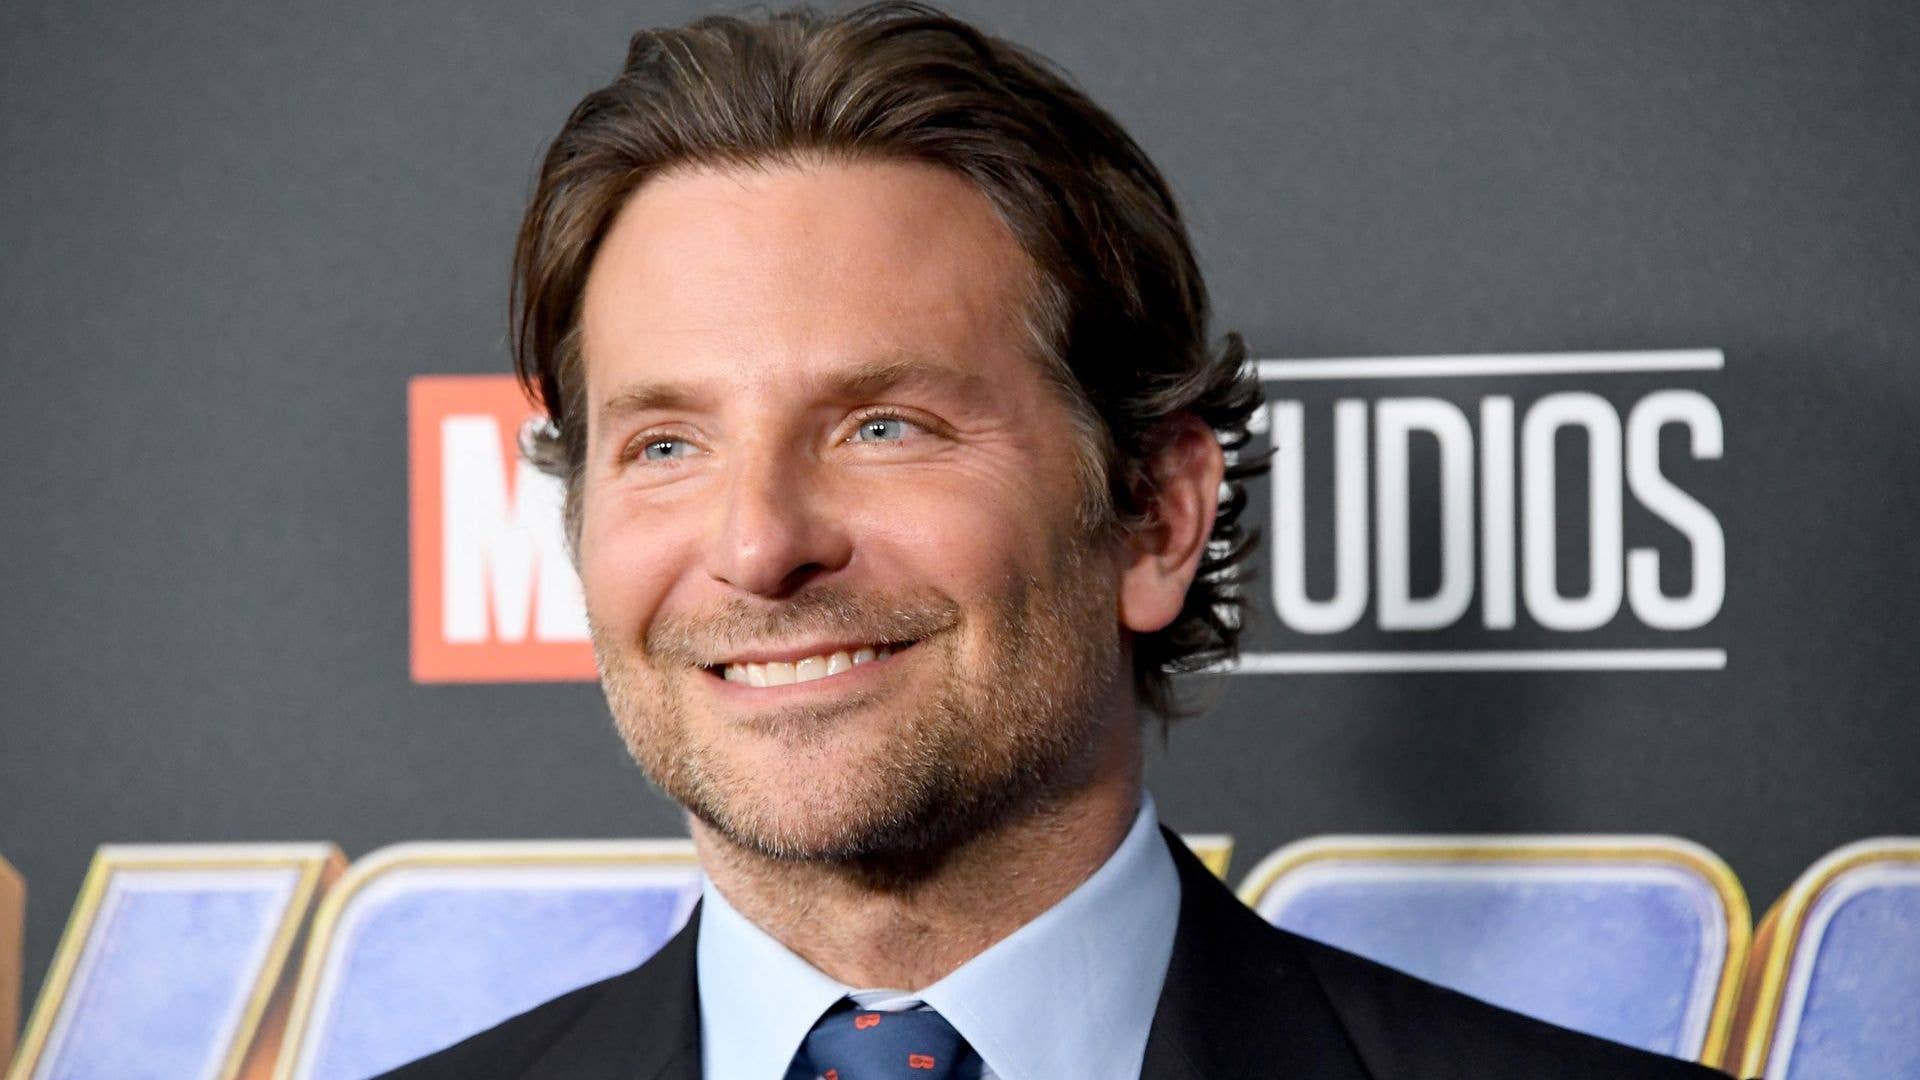 Bradley Cooper attends the premiere of "Avengers: Endgame" in 2019